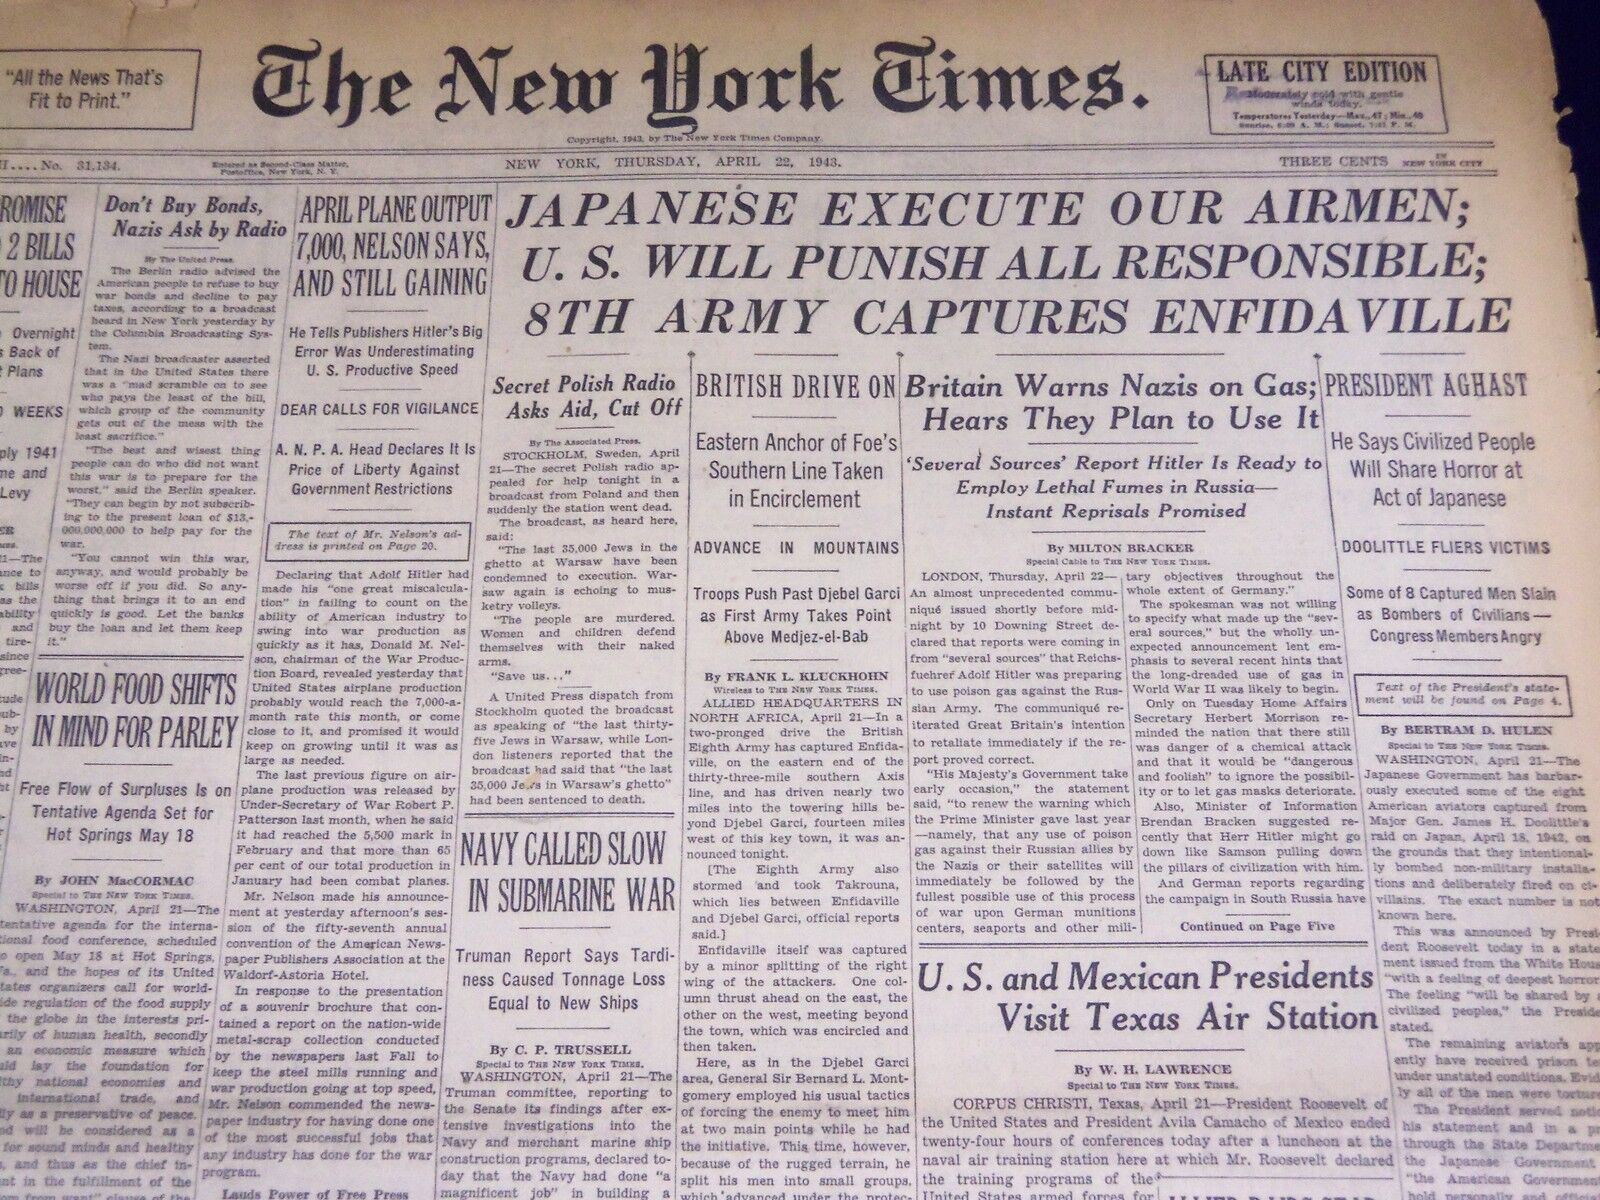 1943 APRIL 22 NEW YORK TIMES - JAPANESE EXECUTE OUR AIRMEN - NT 1912